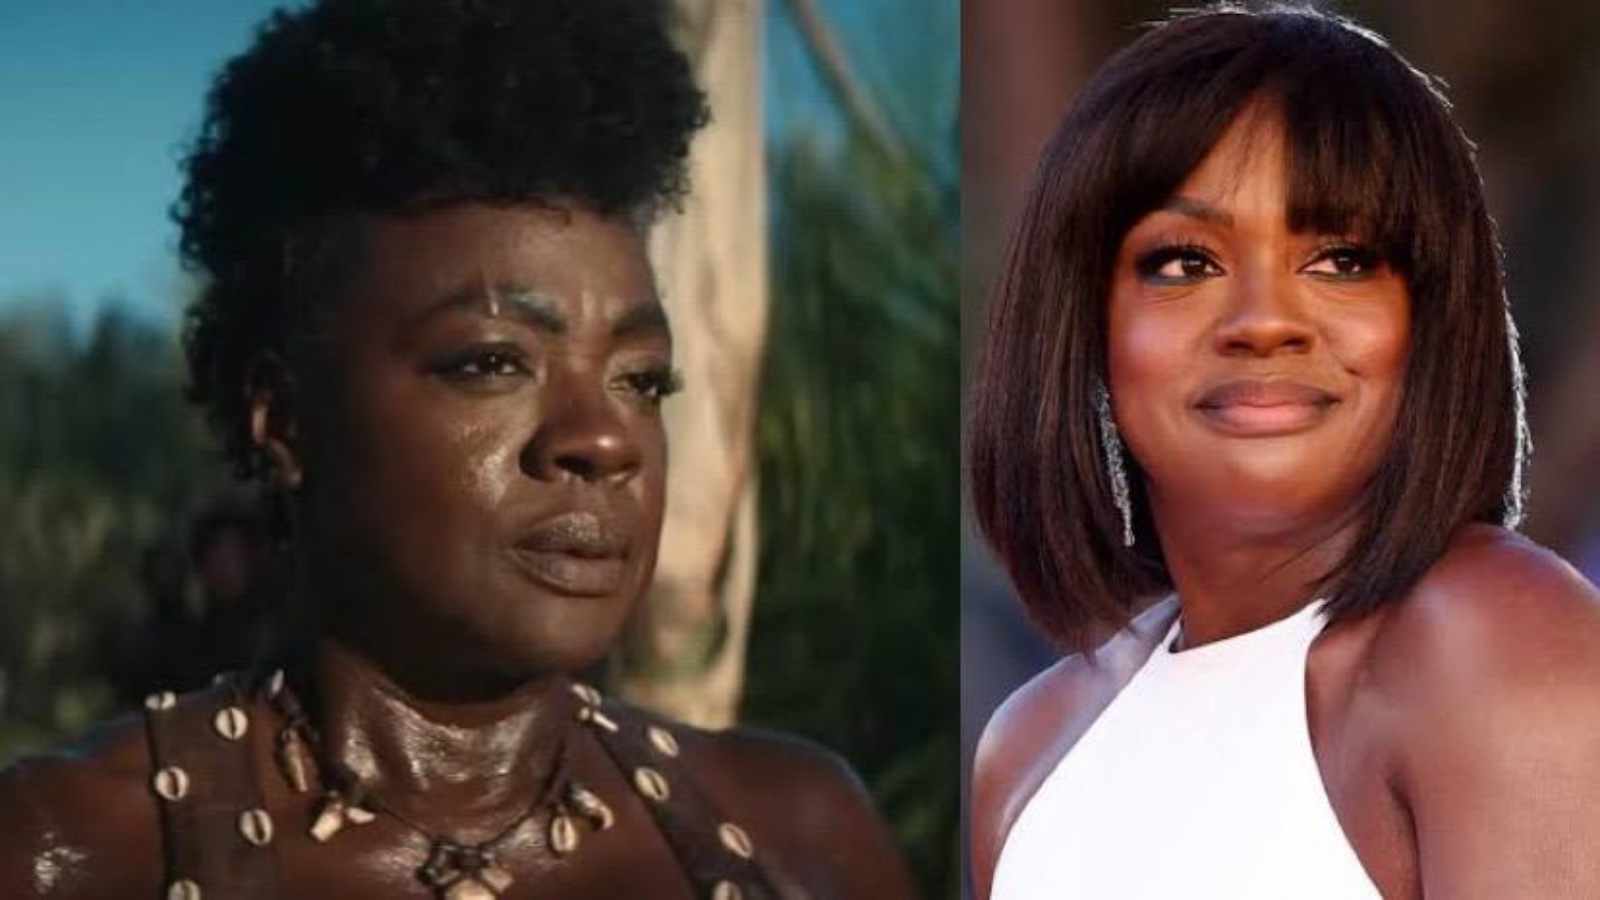 Viola Davis is playing the lead character in The Woman King